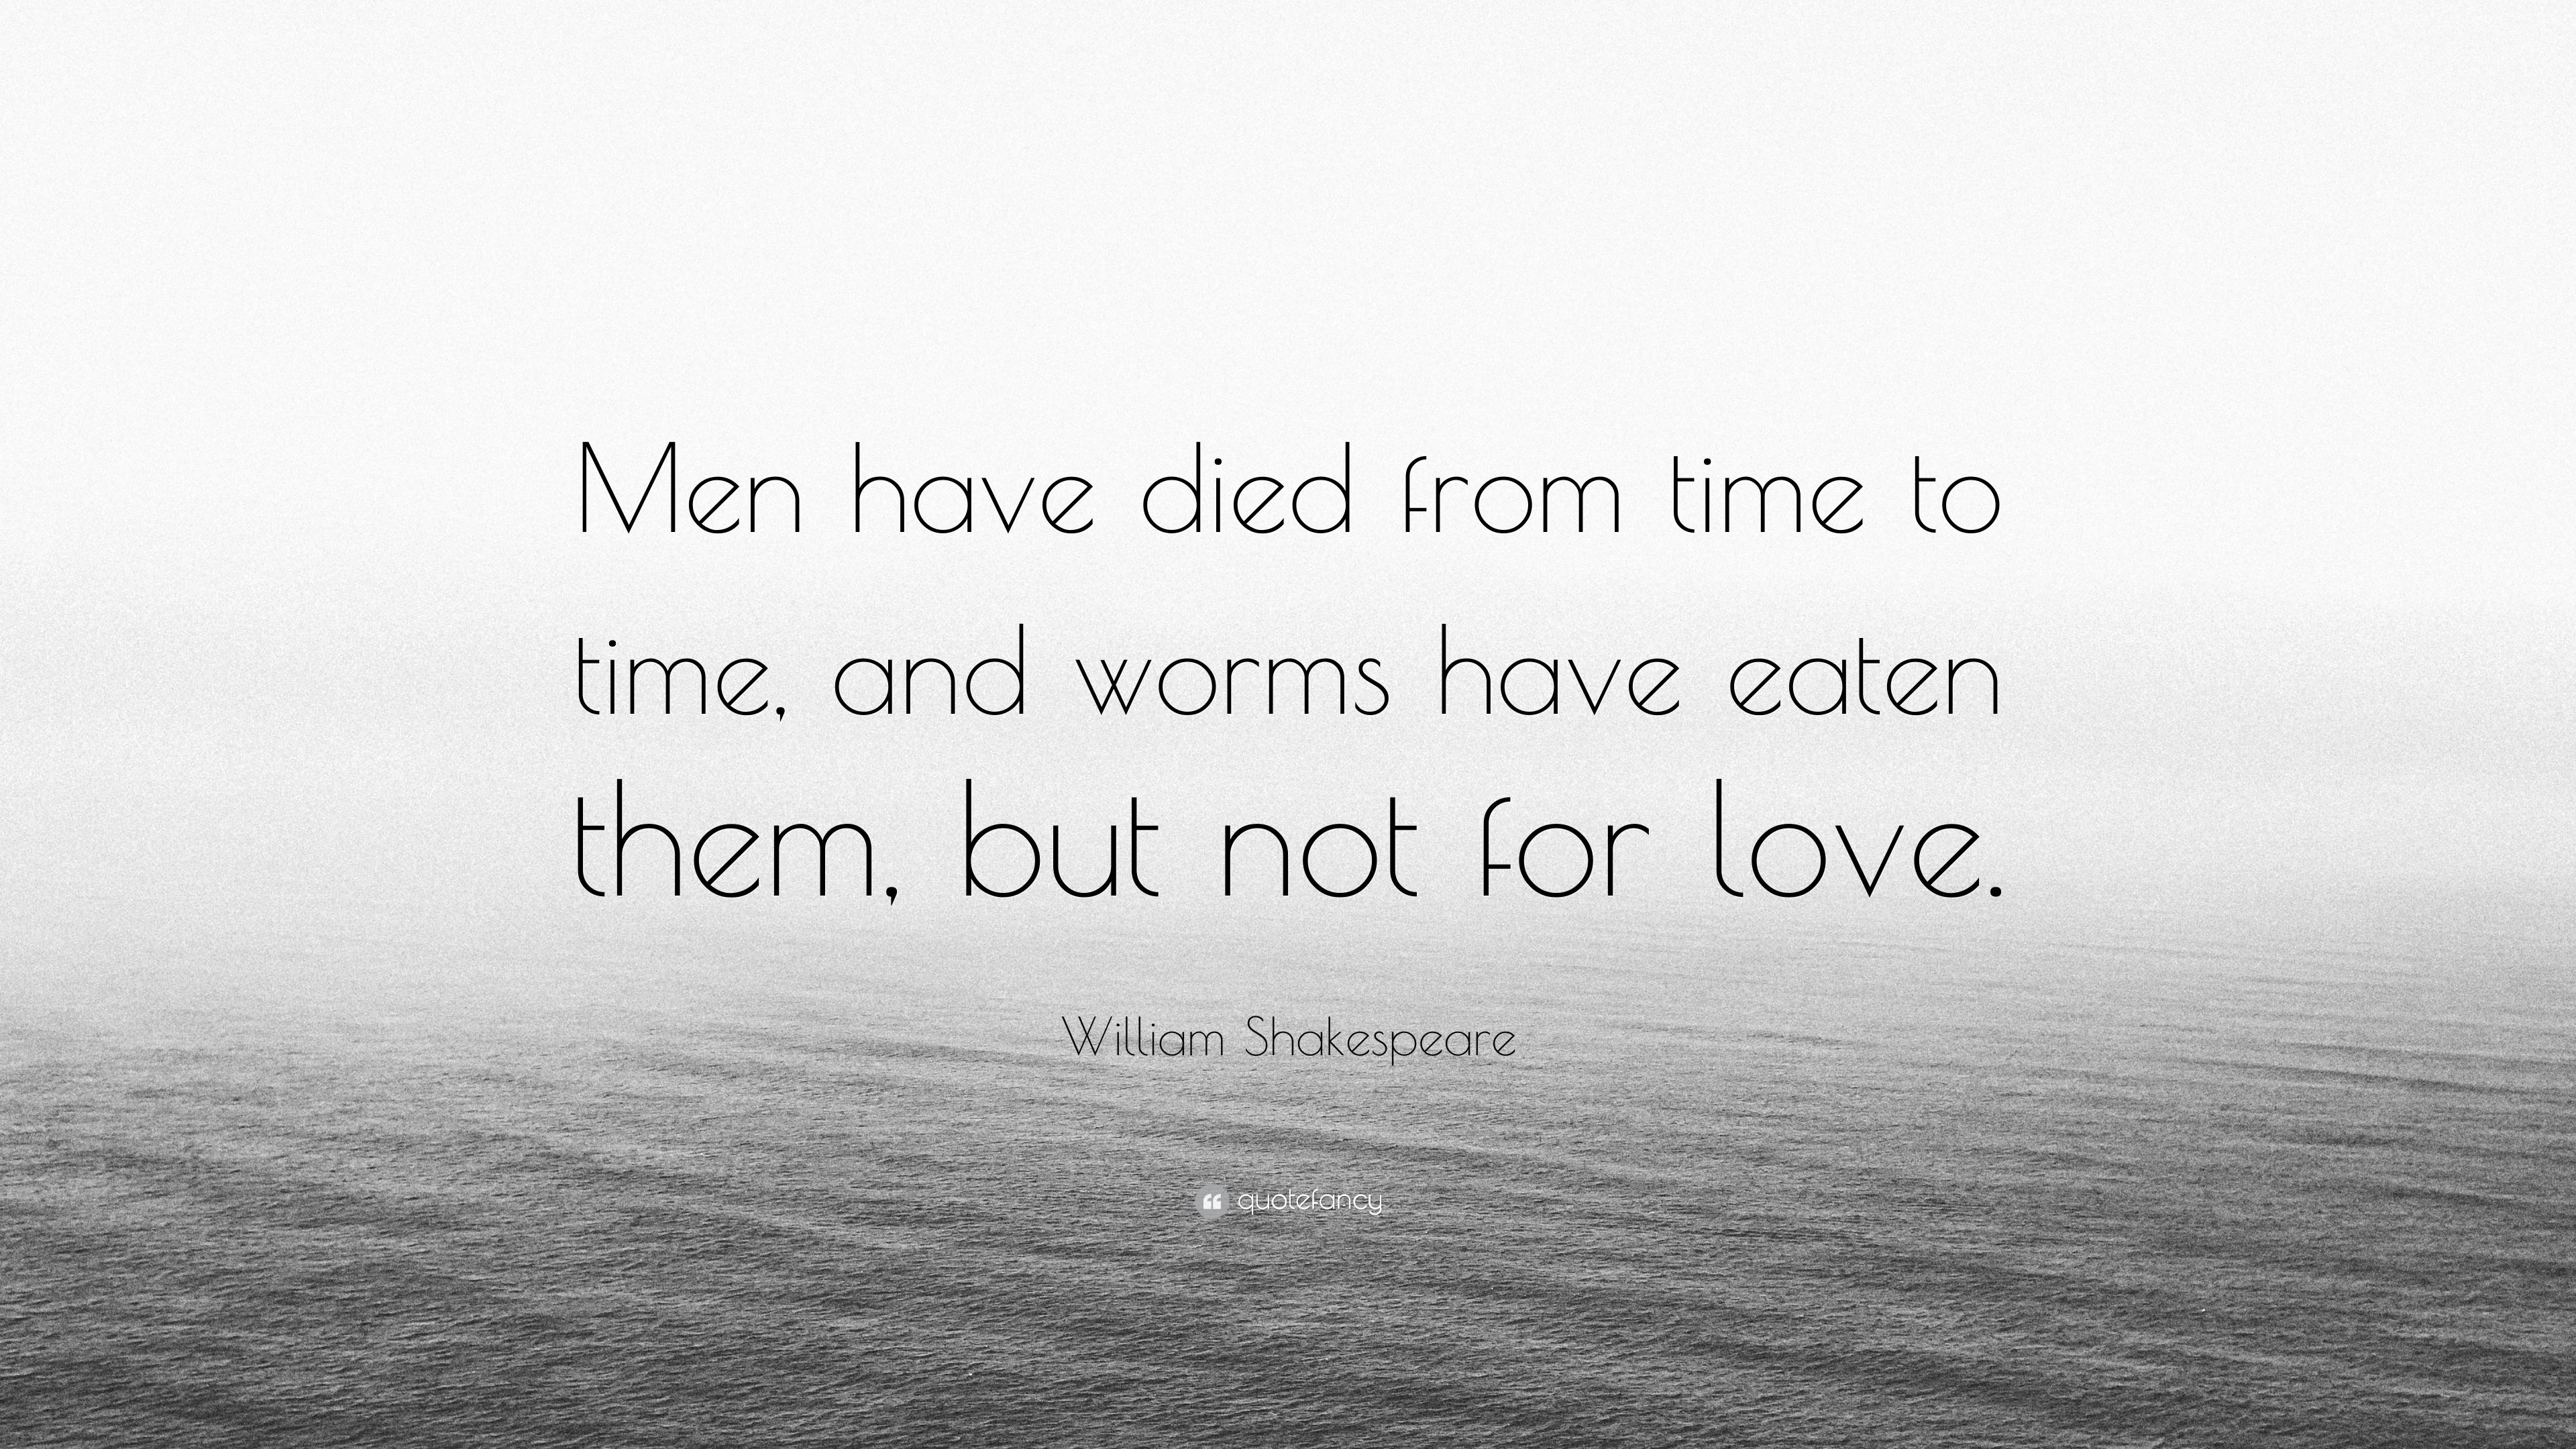 William Shakespeare Quote: “Men have died from time to time